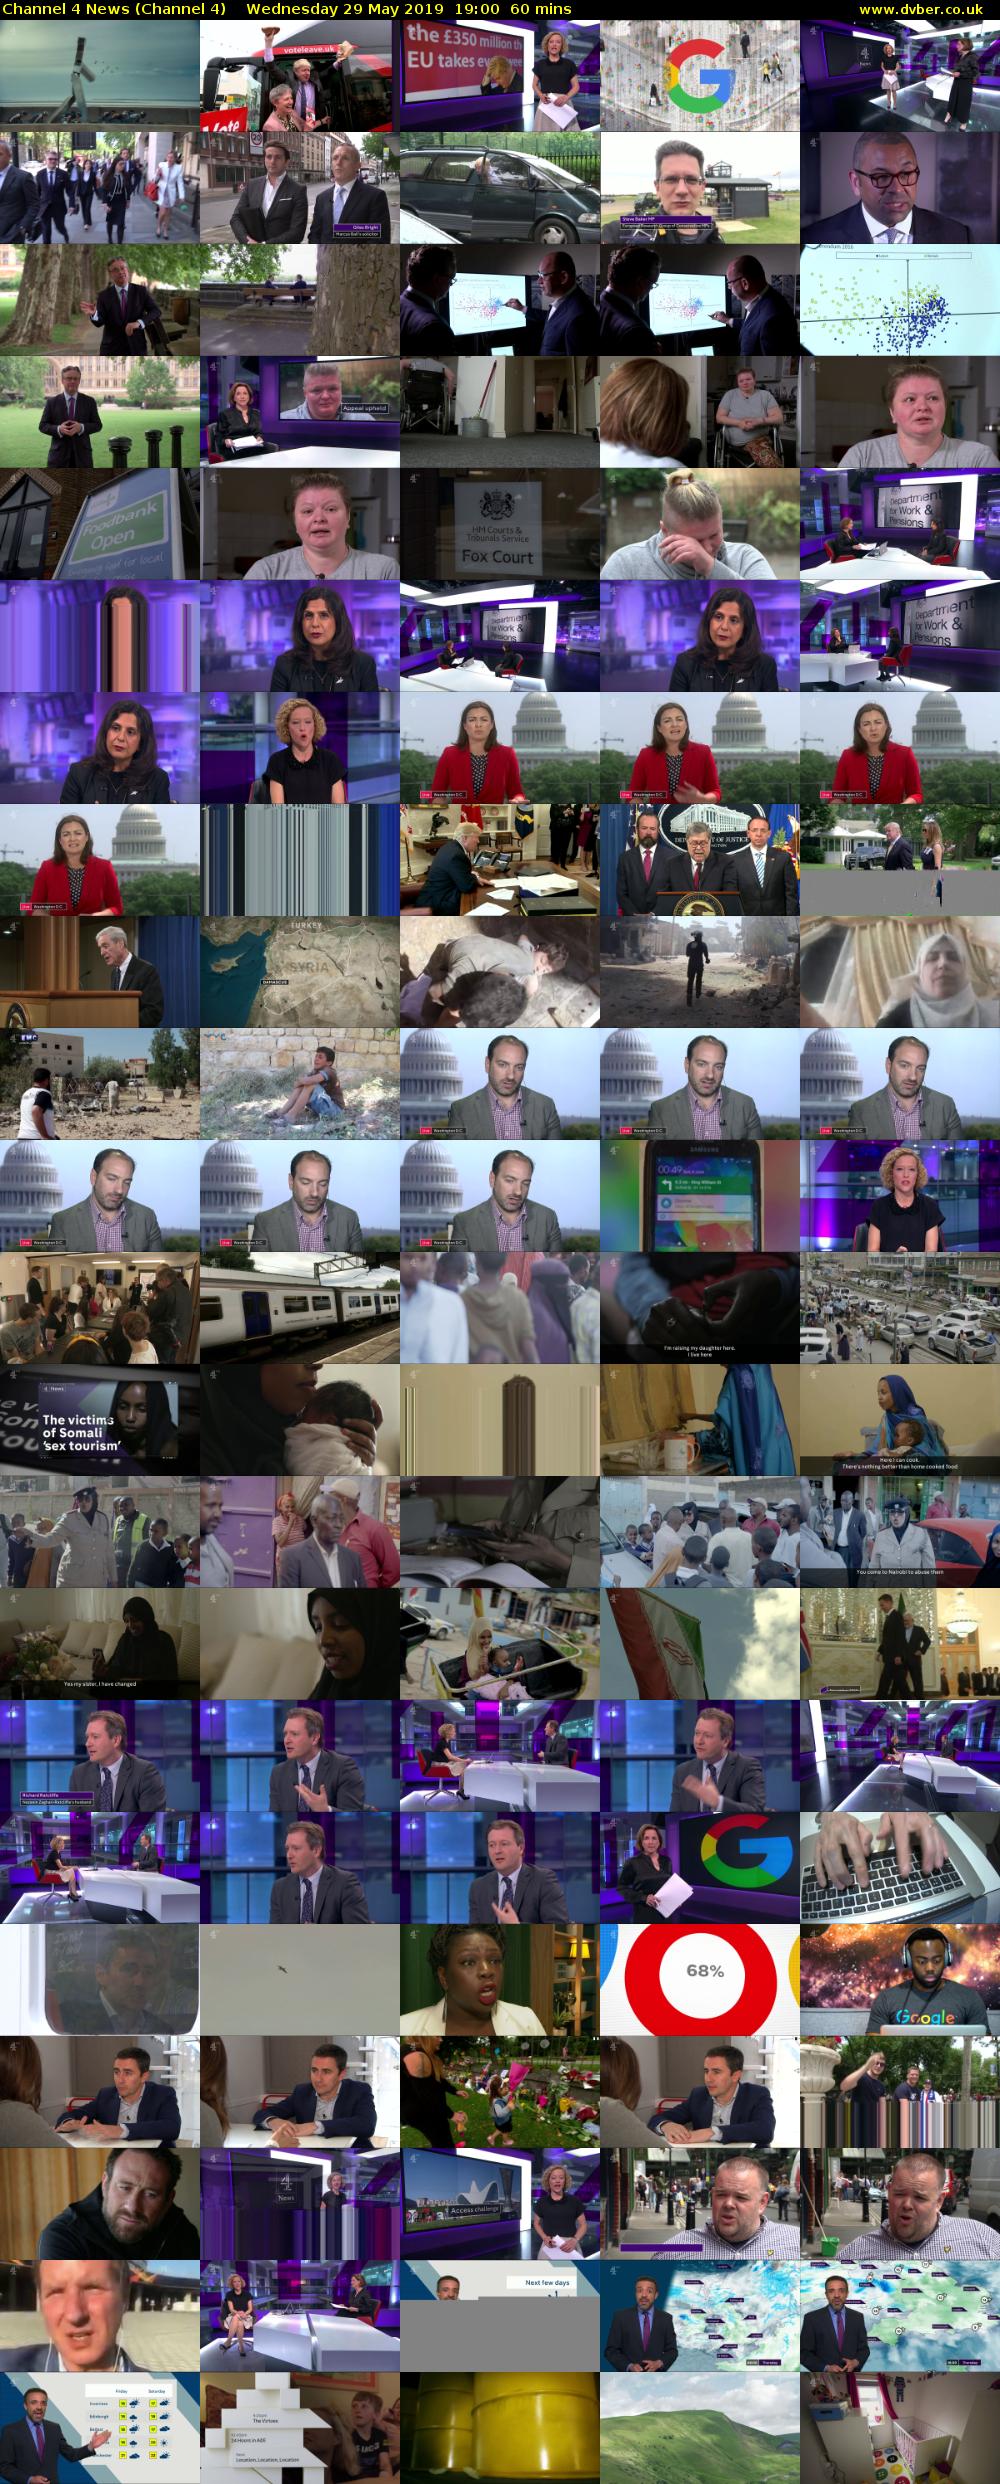 Channel 4 News (Channel 4) Wednesday 29 May 2019 19:00 - 20:00